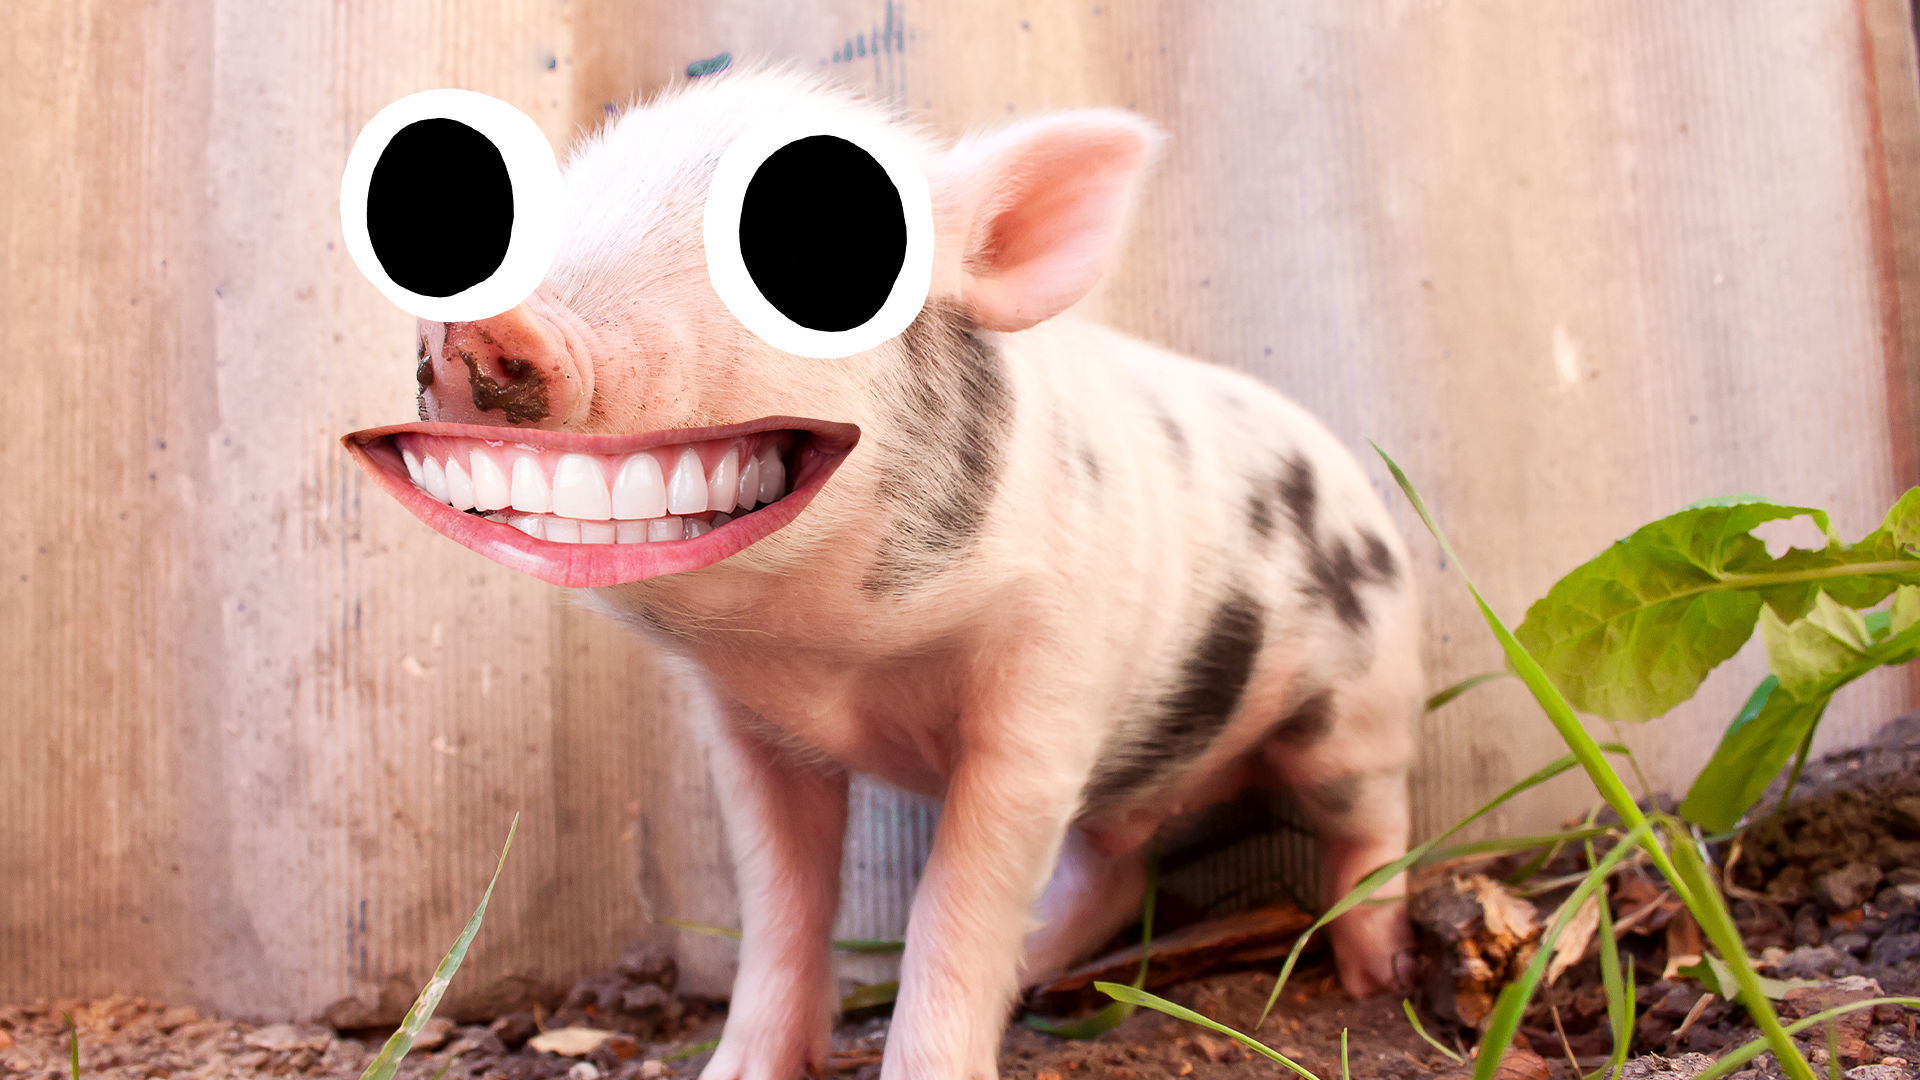 A silly pig